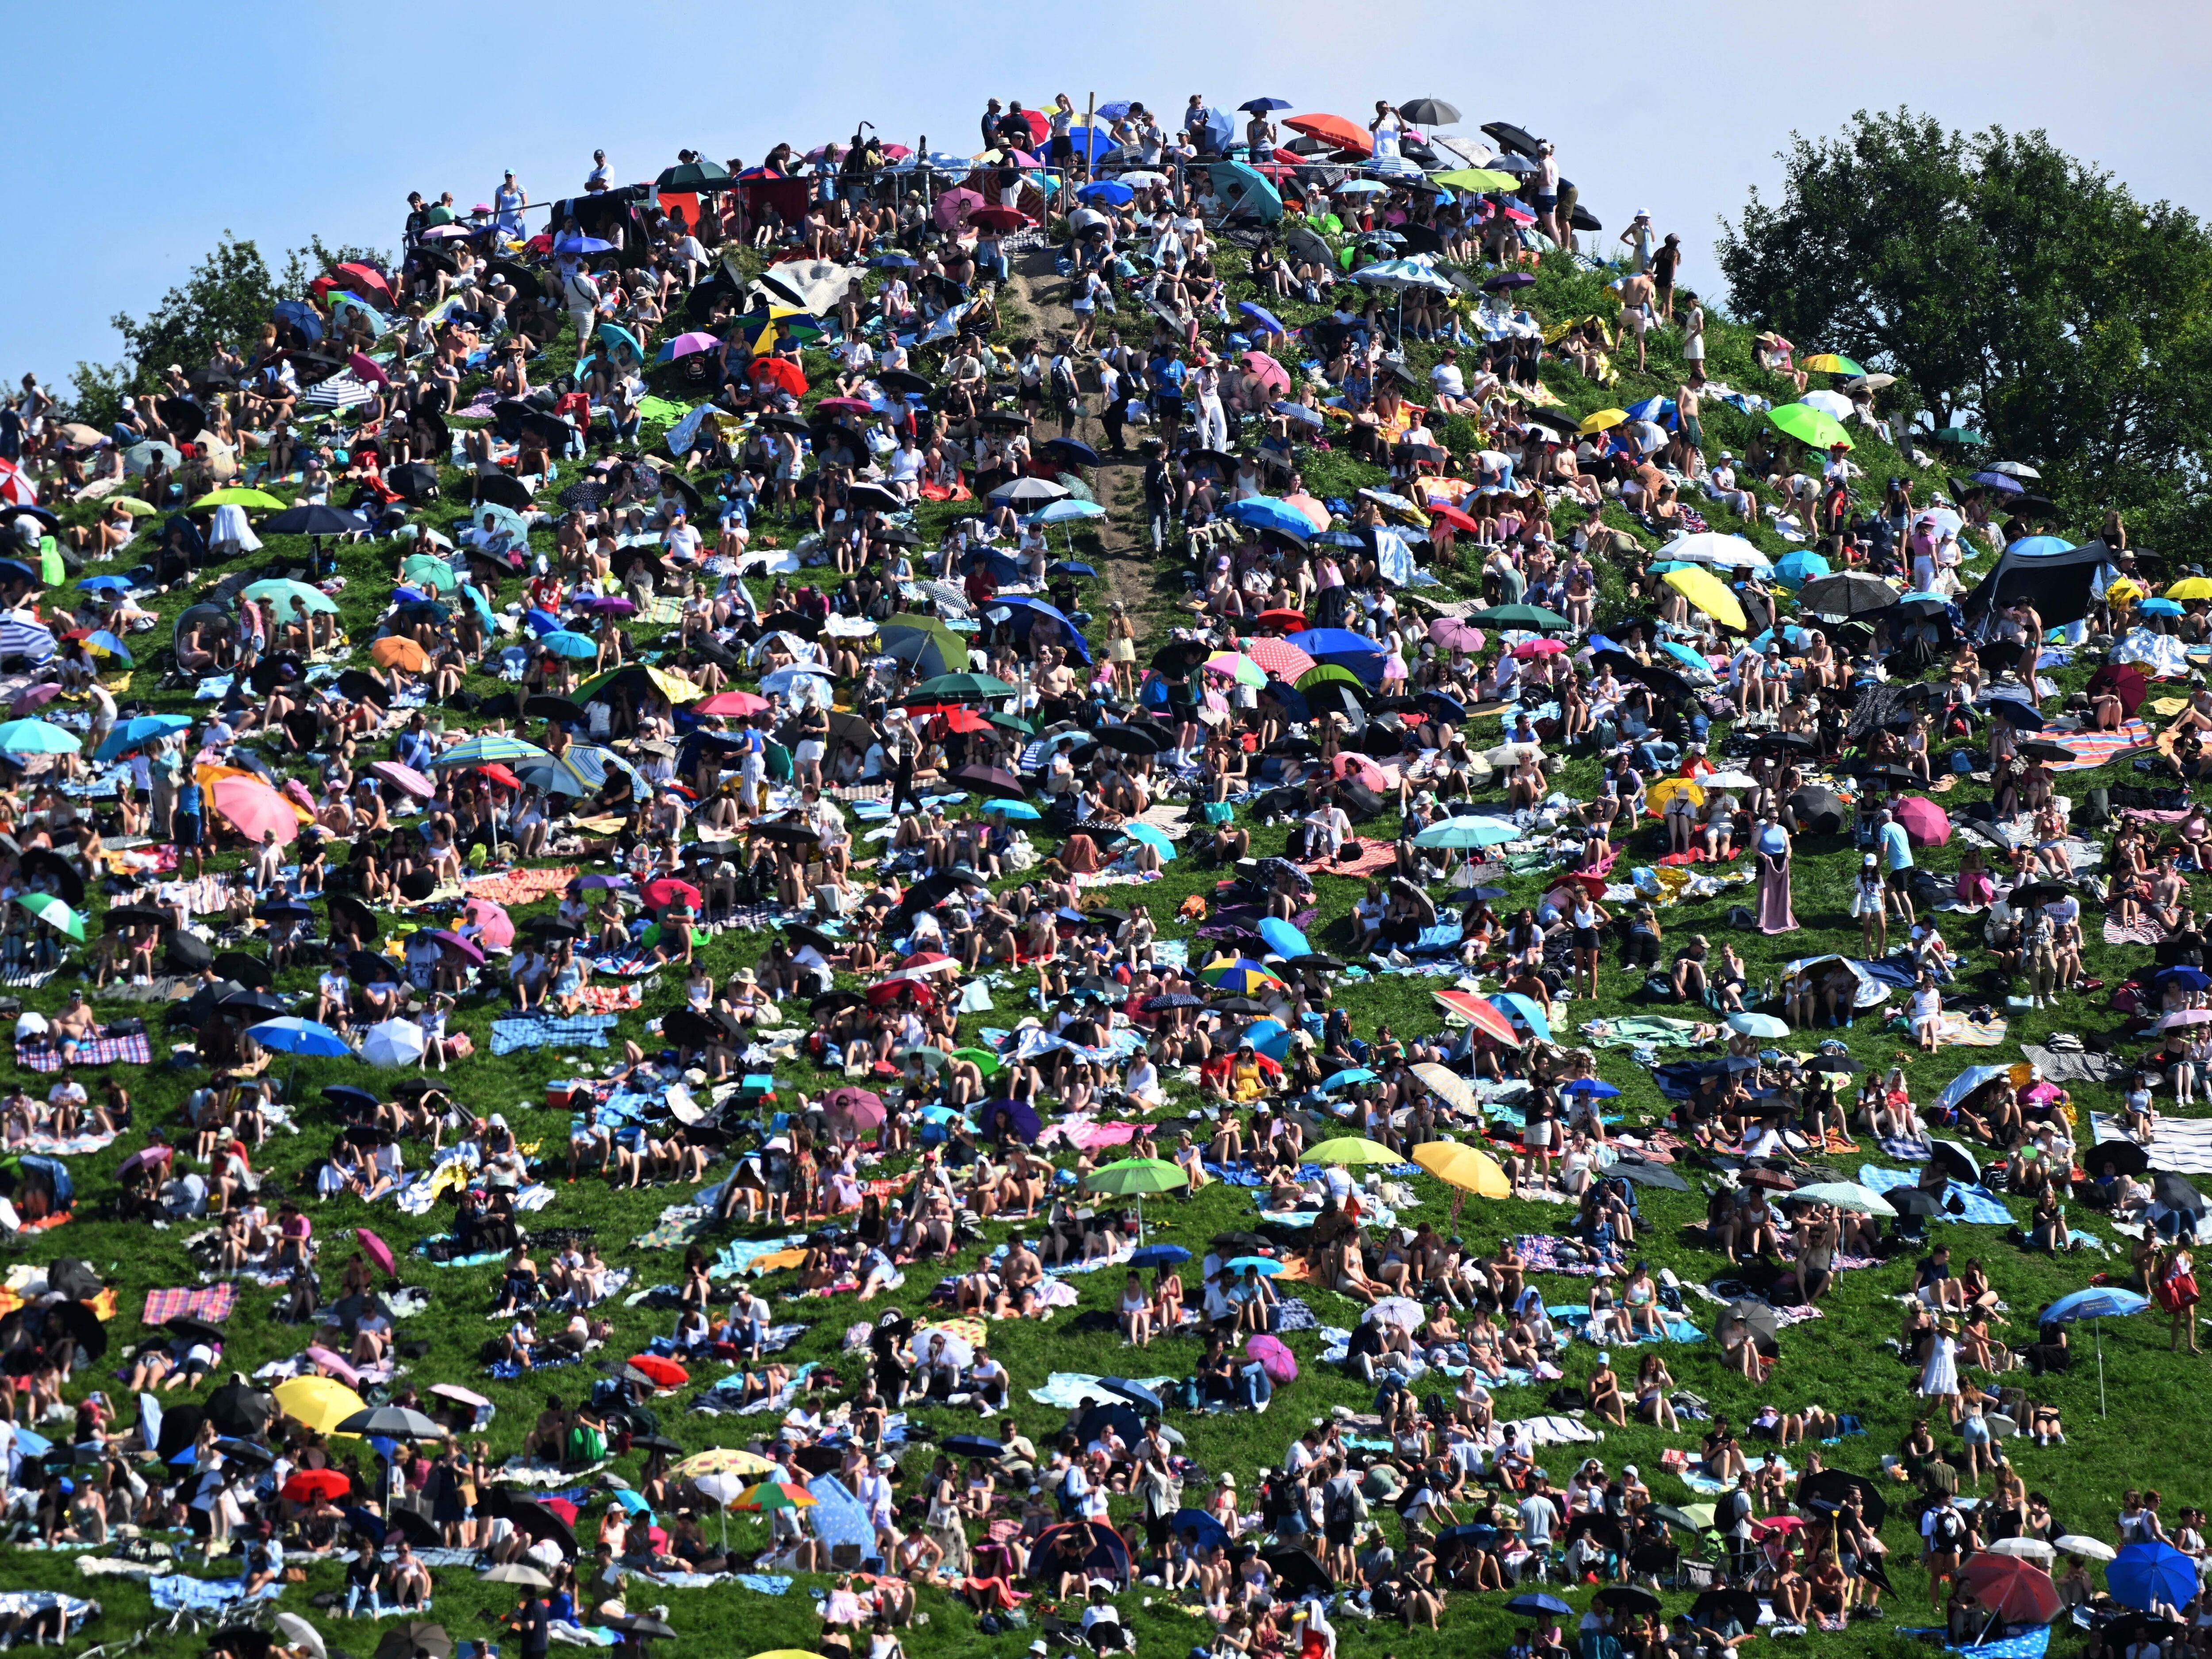 Fans swarm hill in Germany to watch Taylor Swift concert for free